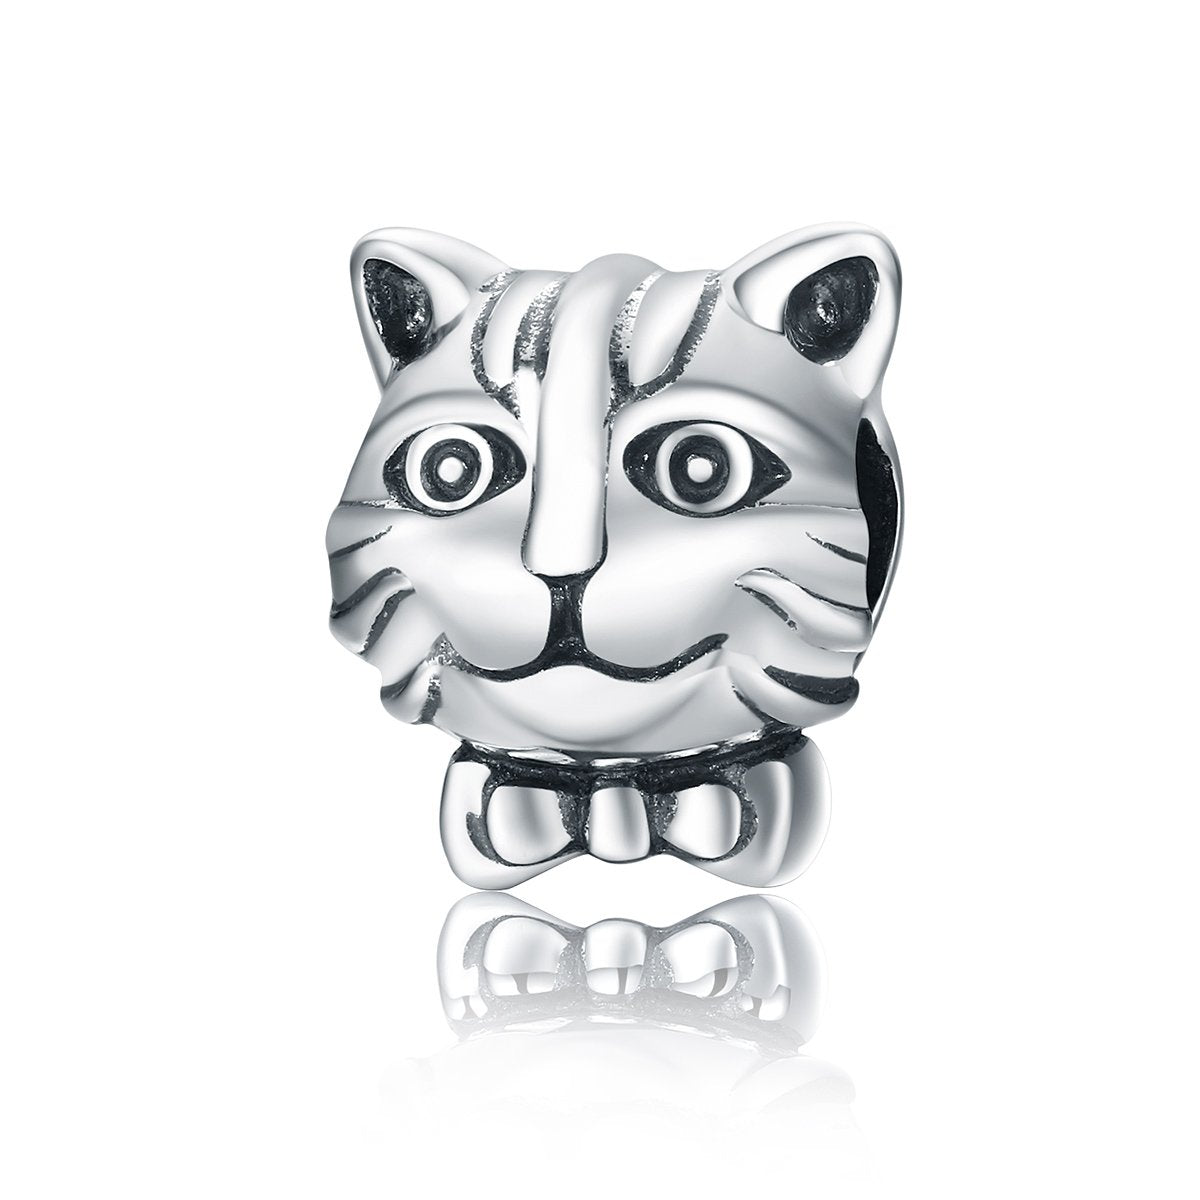 Sterling 925 silver charm the cat/pussy bead pendant fits Pandora charm and European charm bracelet Xaxe.com